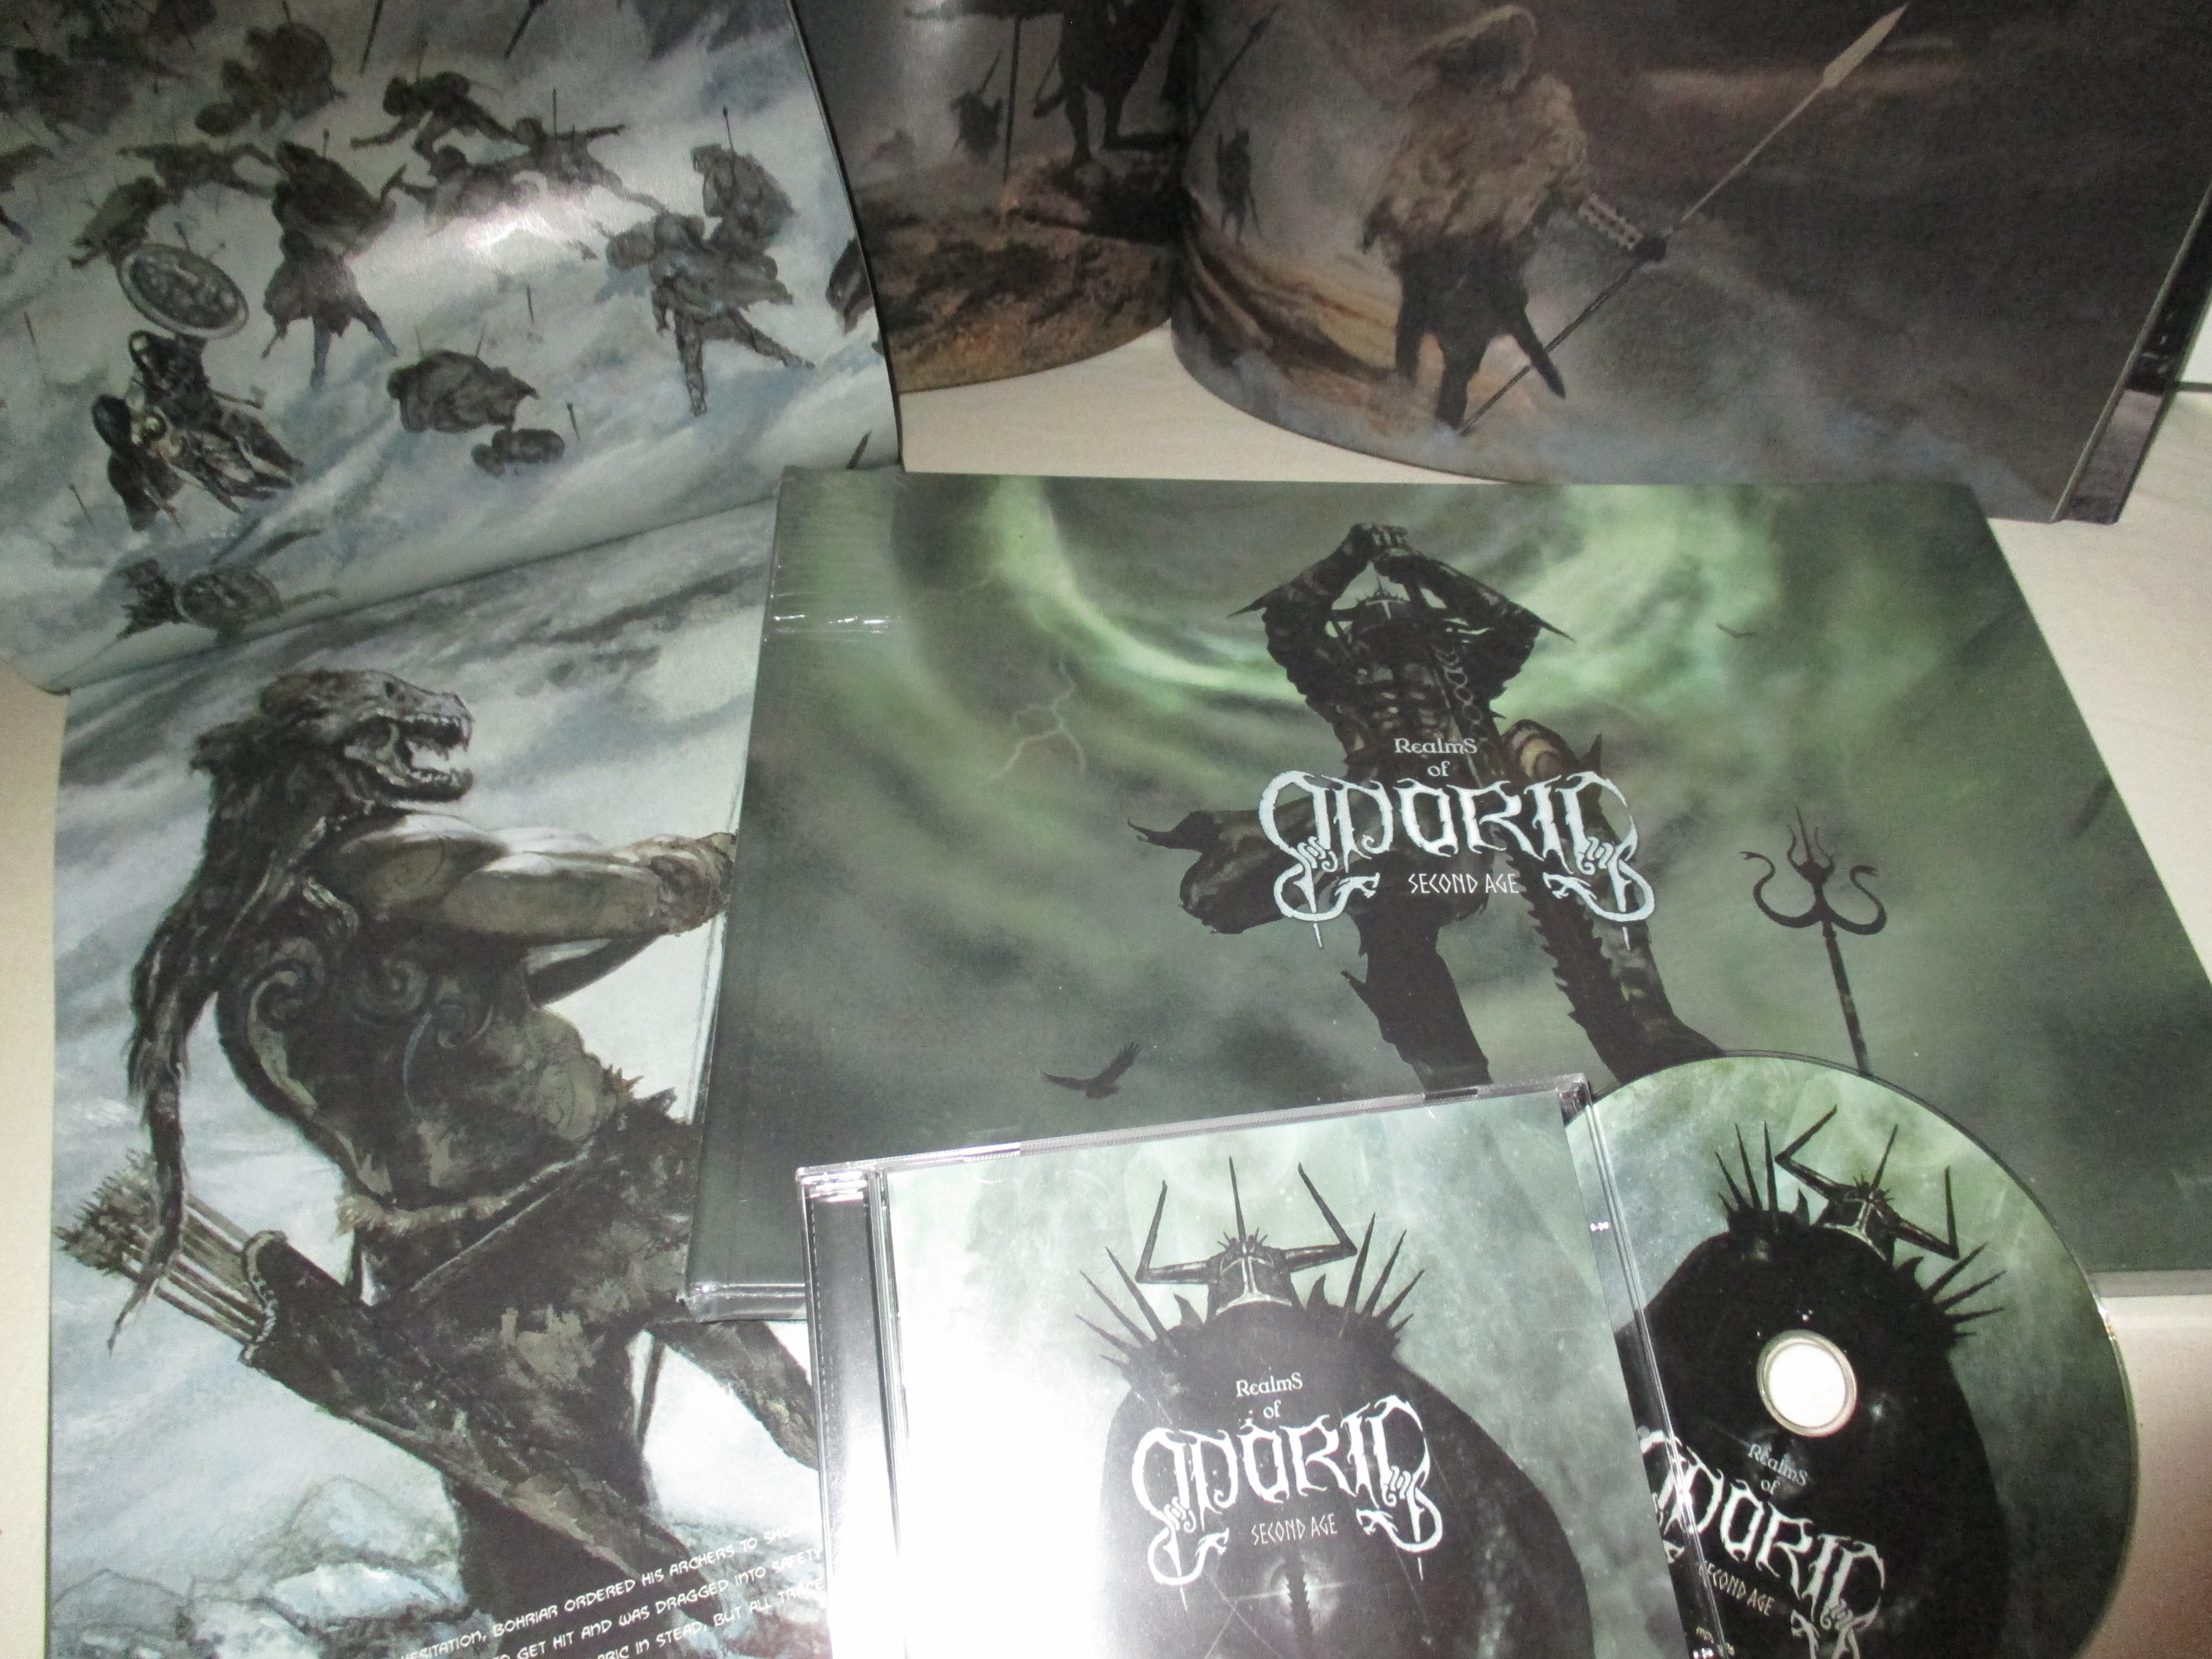 Realms Of Odoric - "Second Age" Full Version Edition CD + BOOK